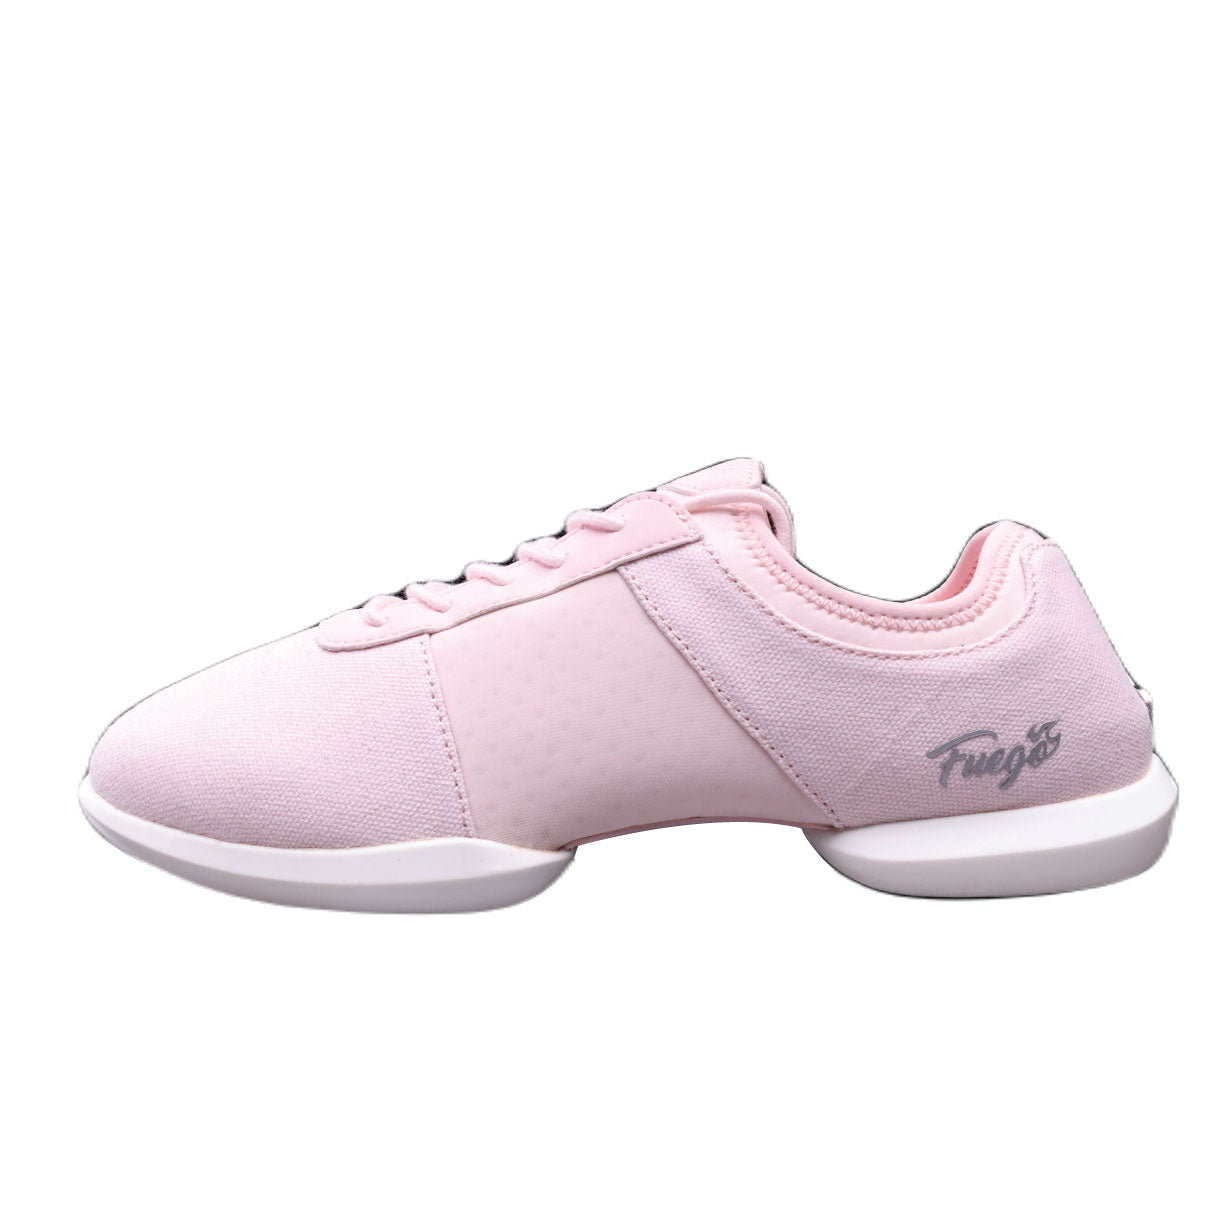 Fuego Dance Sneakers in Pink with Split Sole